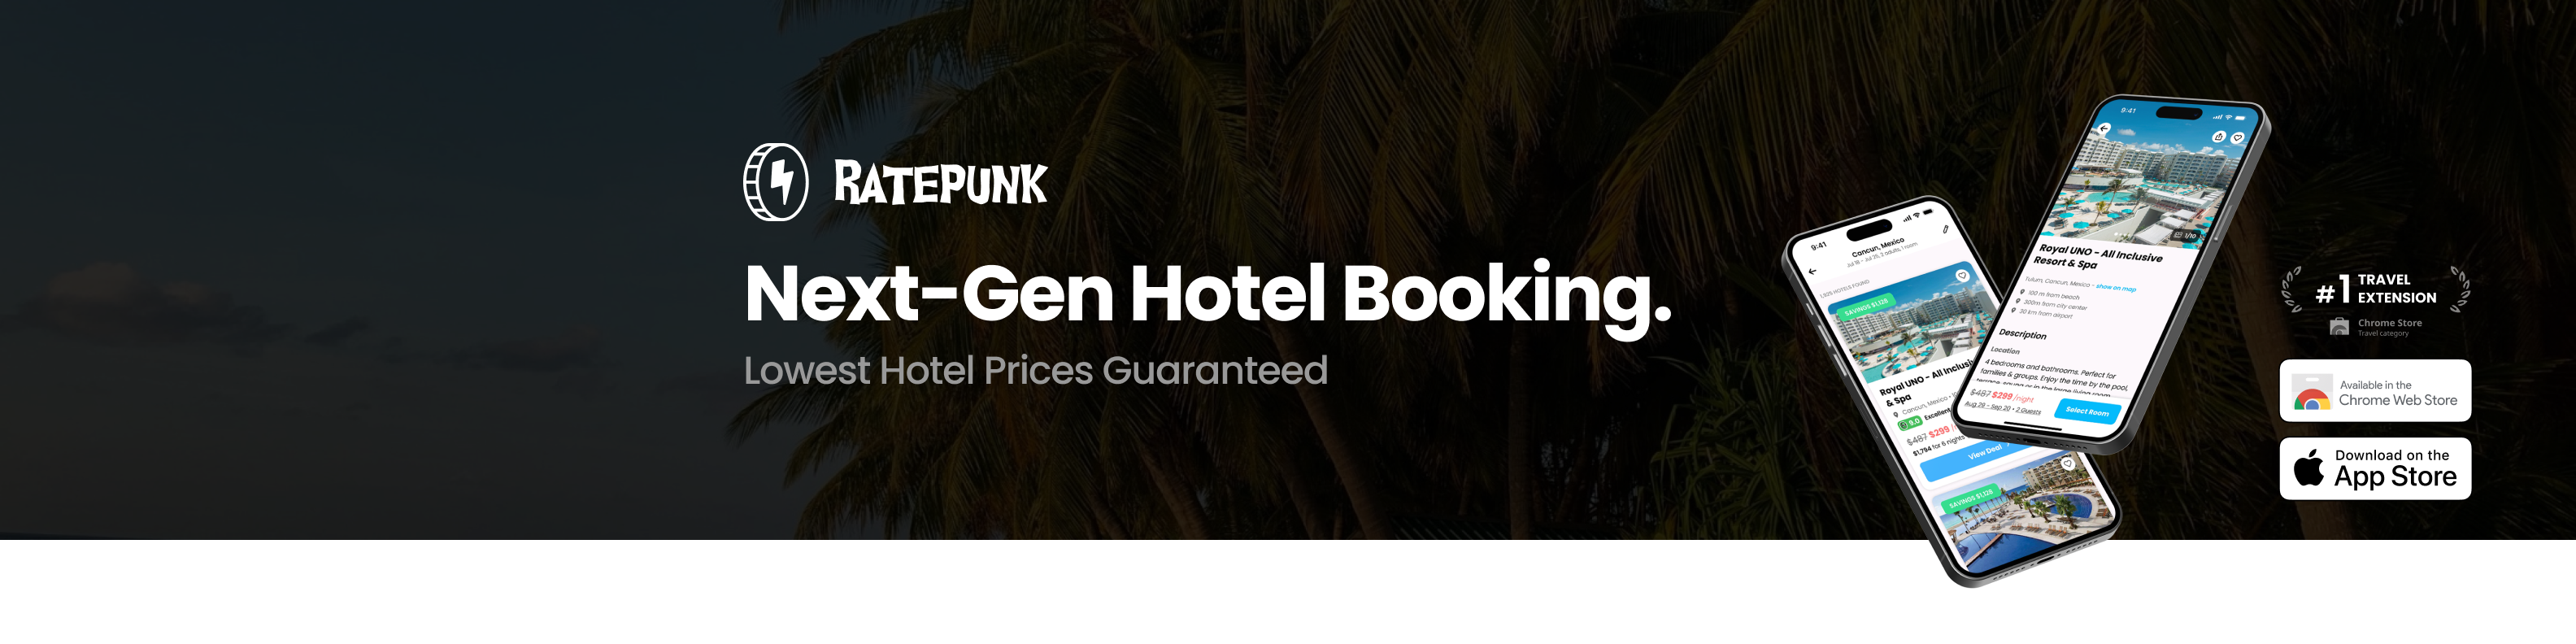 ratepunk- next gen hotel booking lowest hotel prices guaranteed